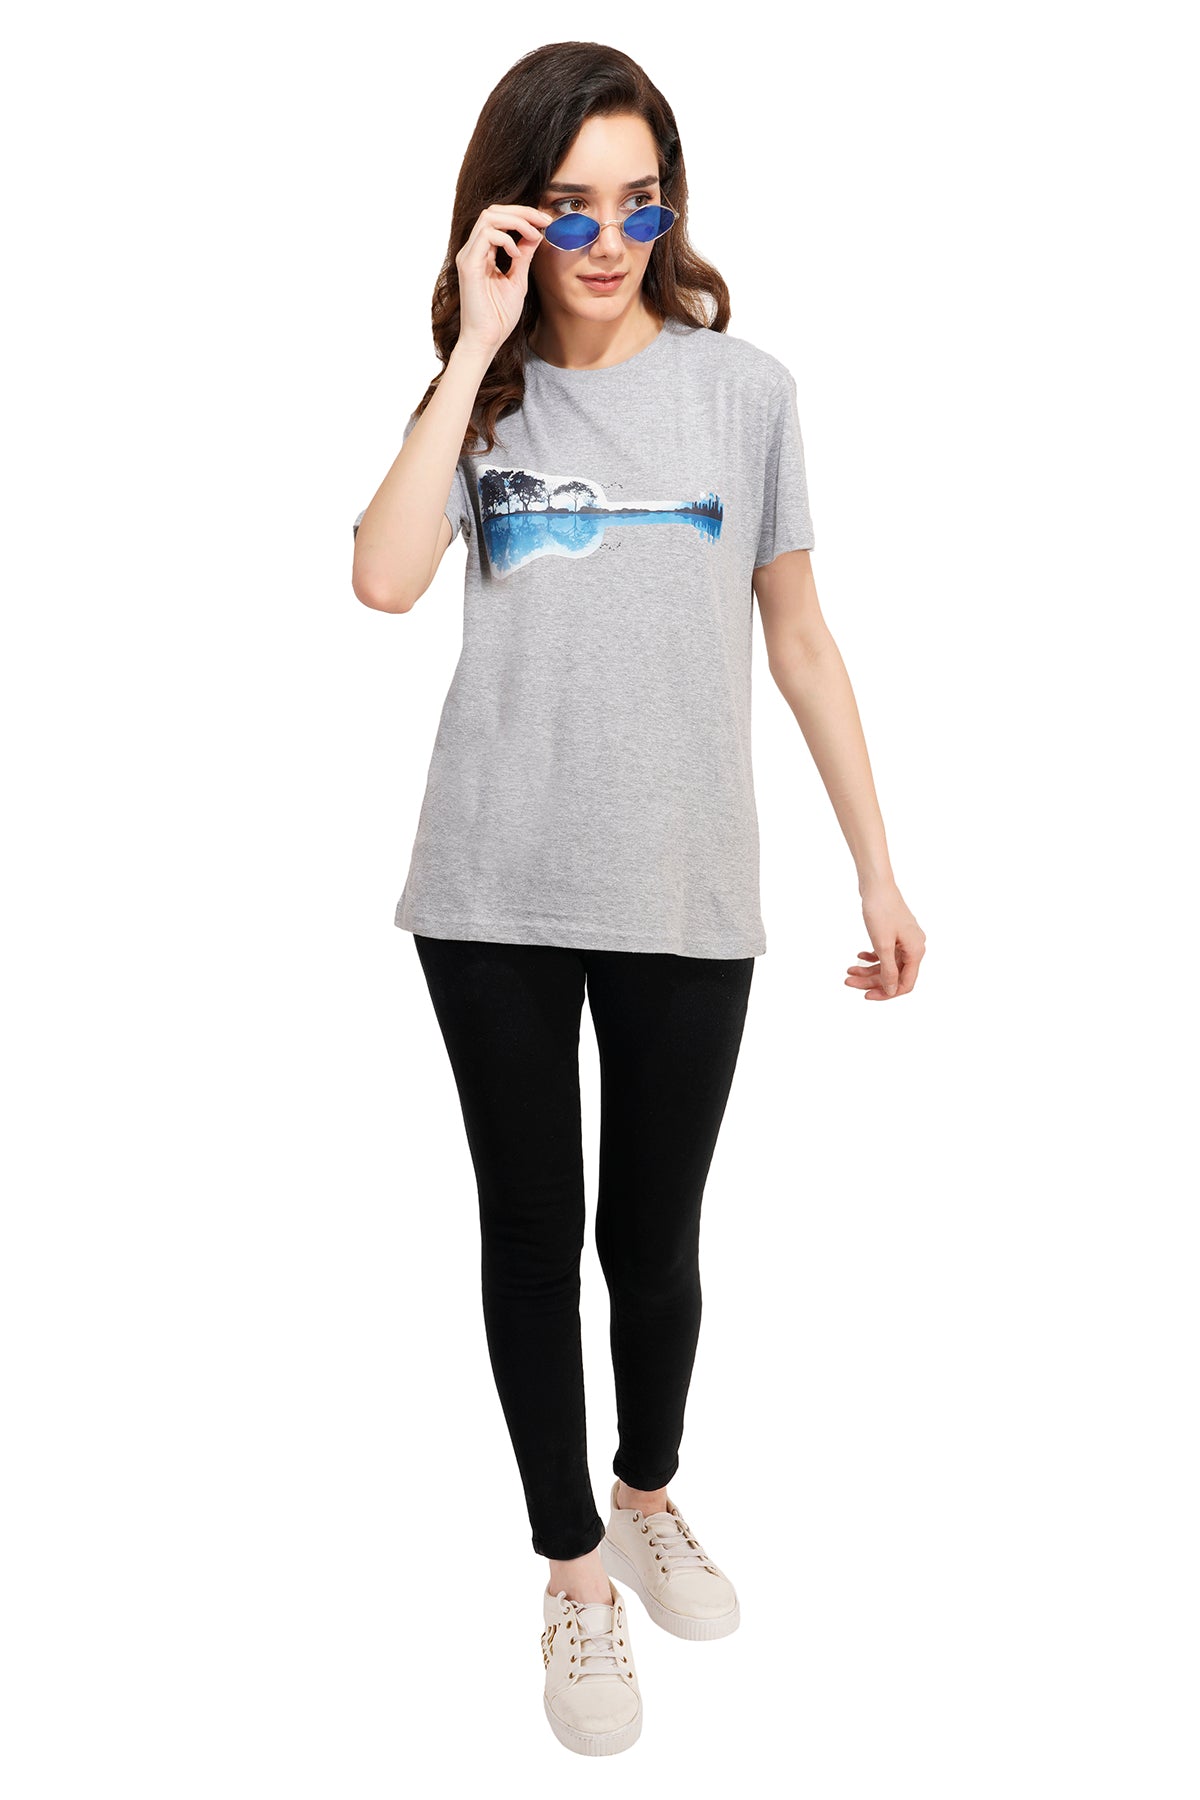 Women Heather Grey Guitar Lake refection t-shirt – SNAZZYNSUAVE